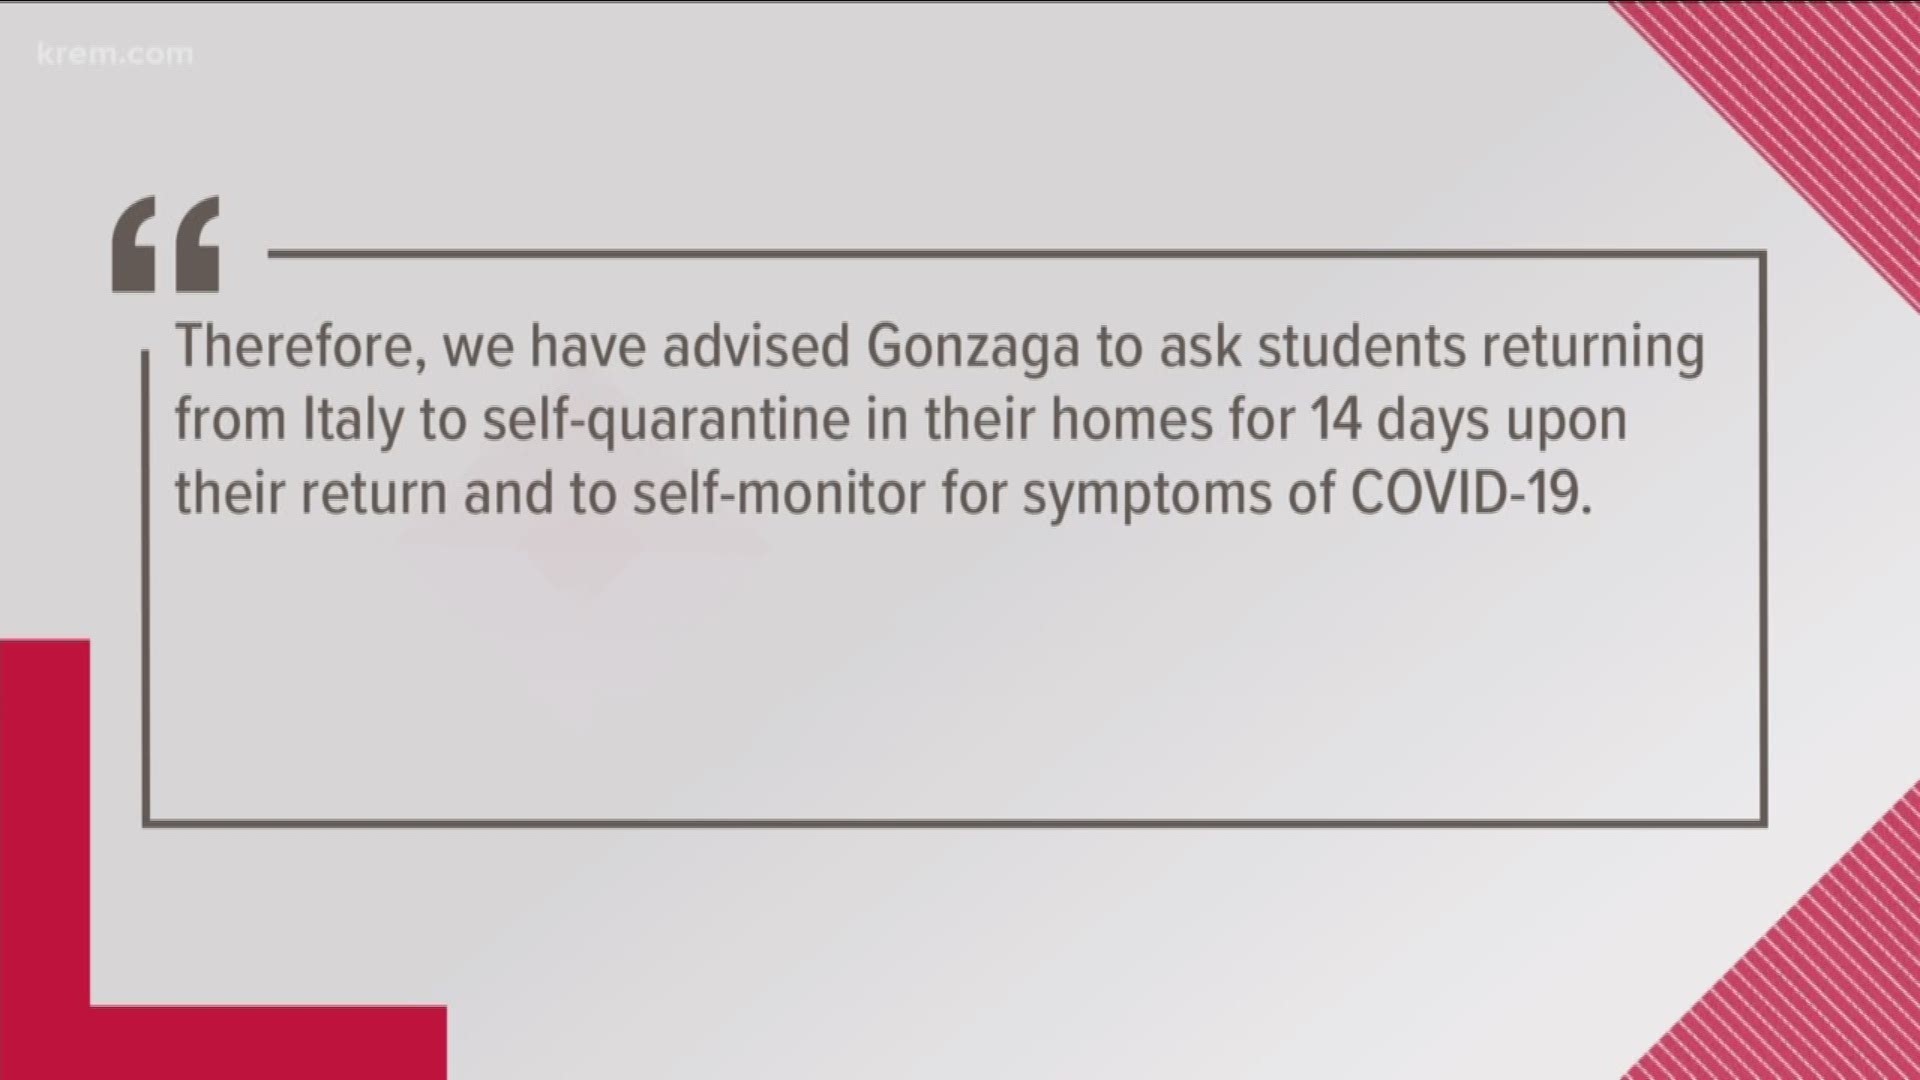 Students who were in Florence, Italy are being asked to self quarantine for 14 days upon their return and to self-monitor for symptoms of COVID-19.